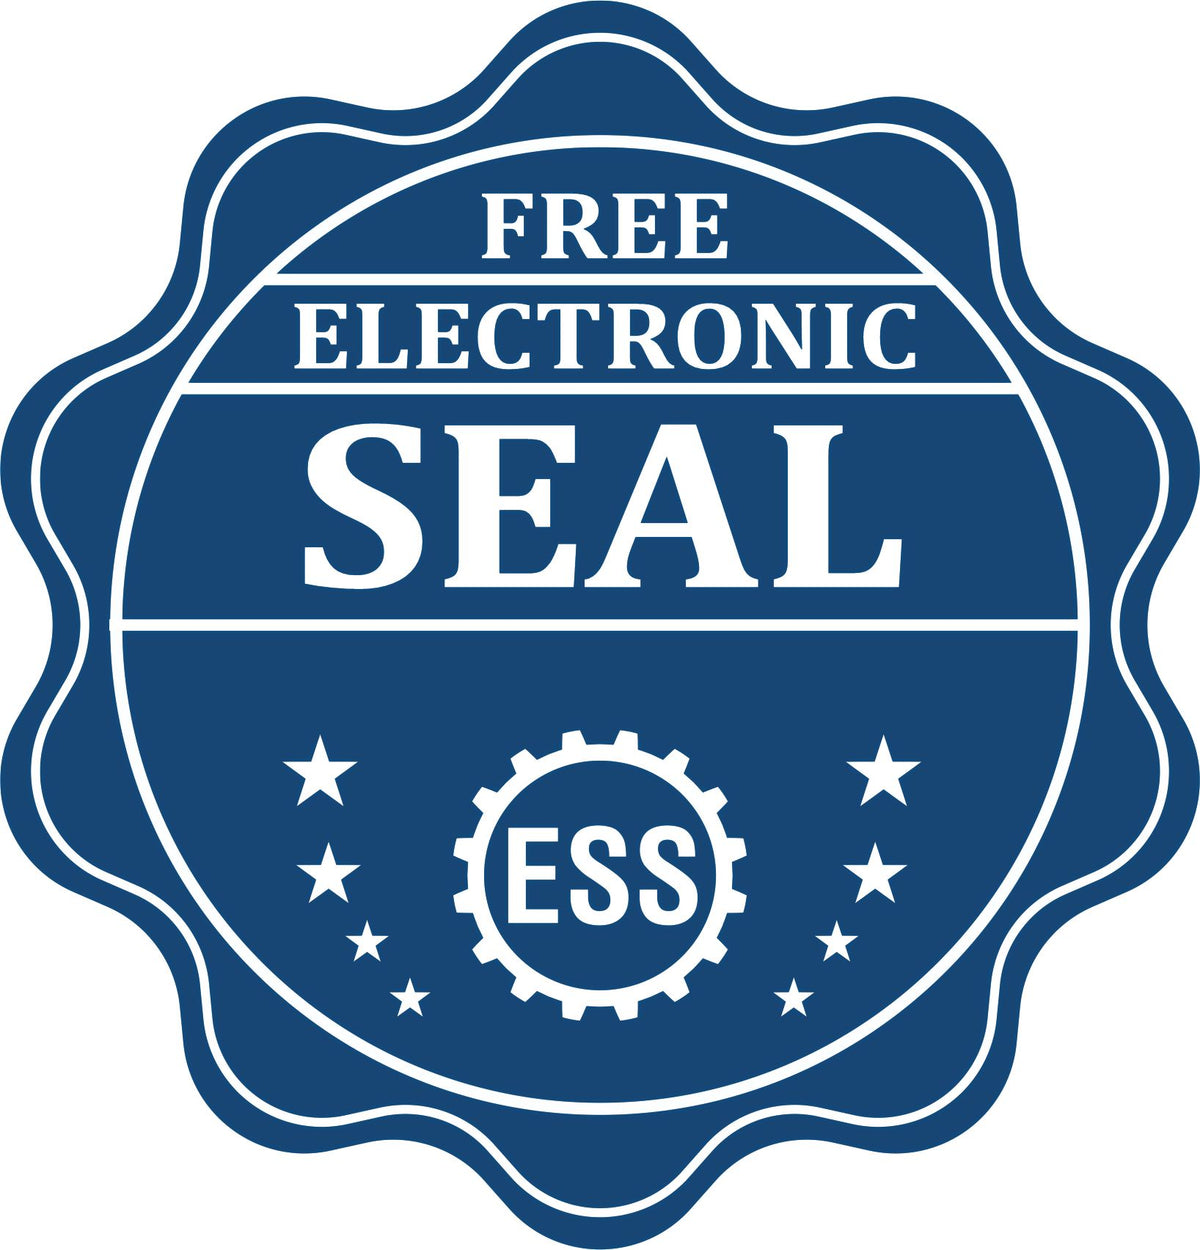 A badge showing a free electronic seal for the Slim Pre-Inked Alabama Land Surveyor Seal Stamp with stars and the ESS gear on the emblem.